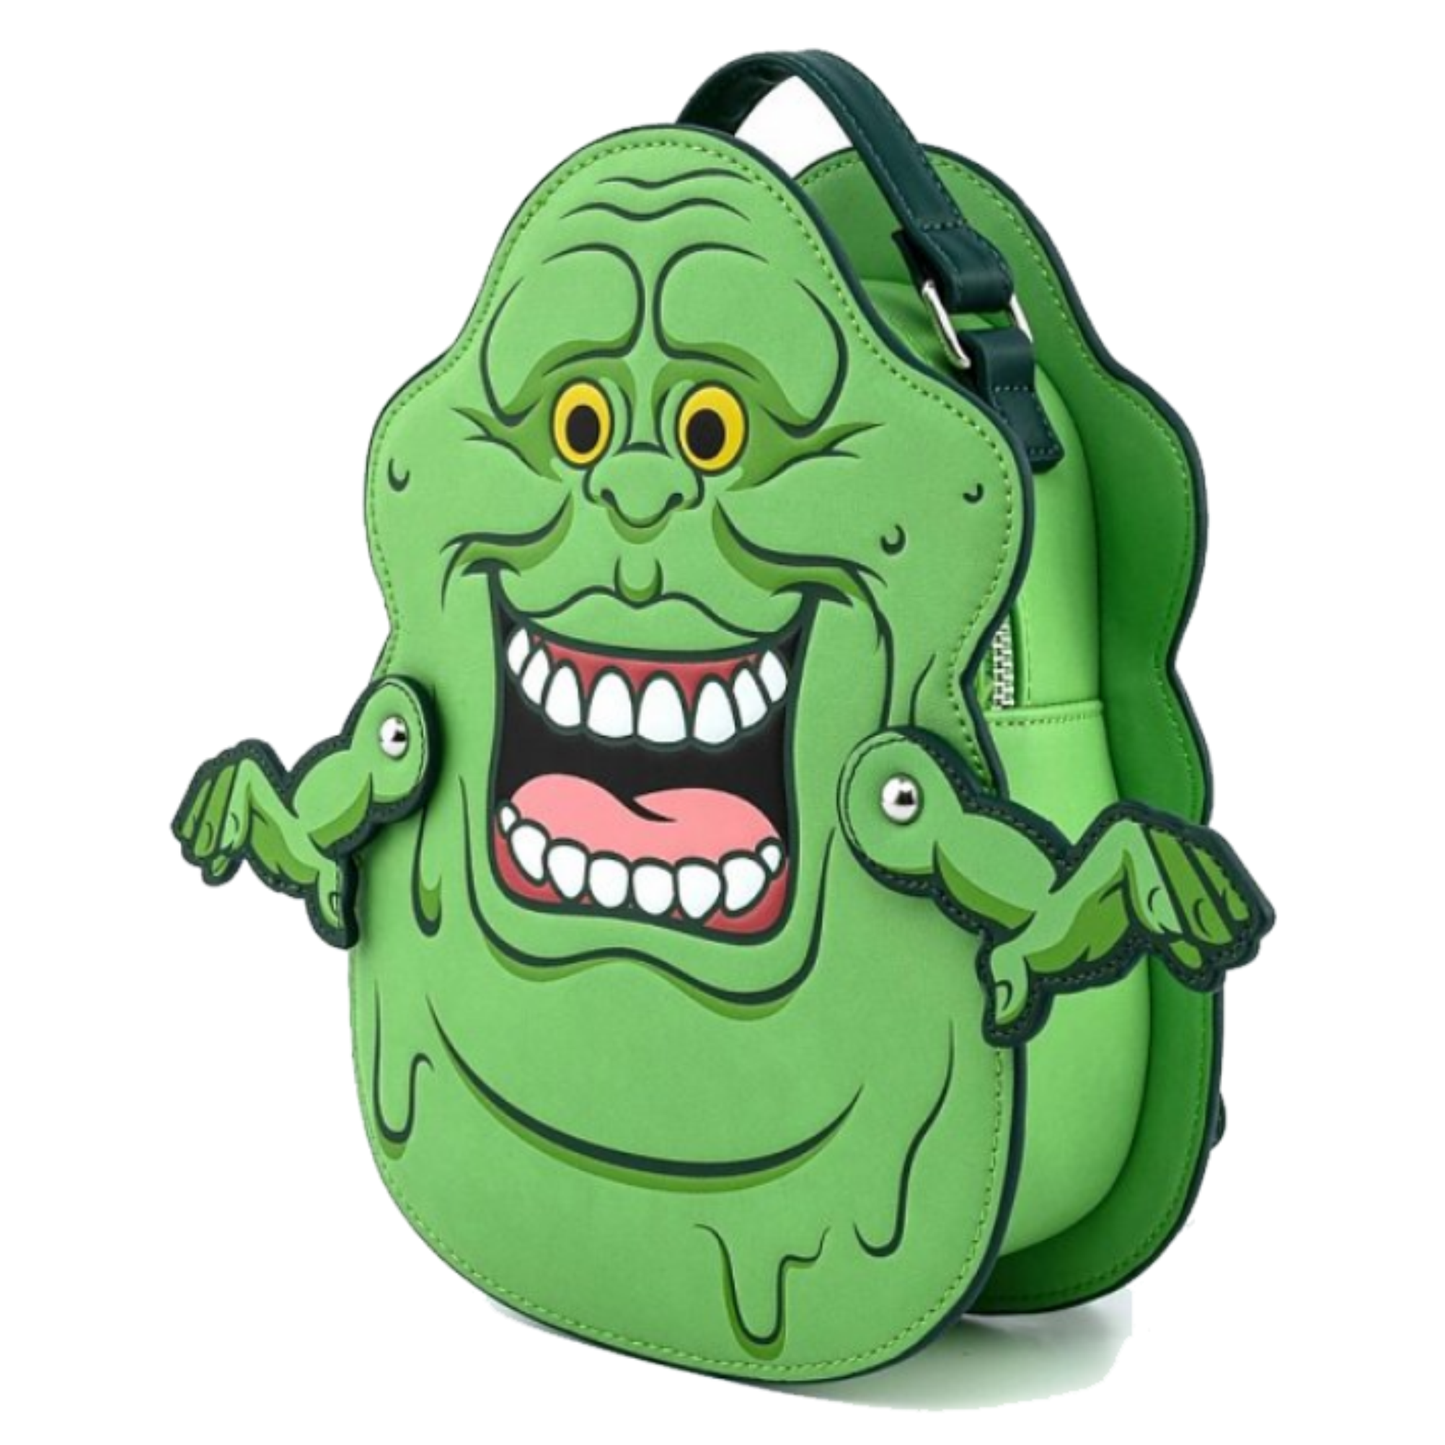 Loungefly x Ghostbusters Slimer Convertible Mini Backpack